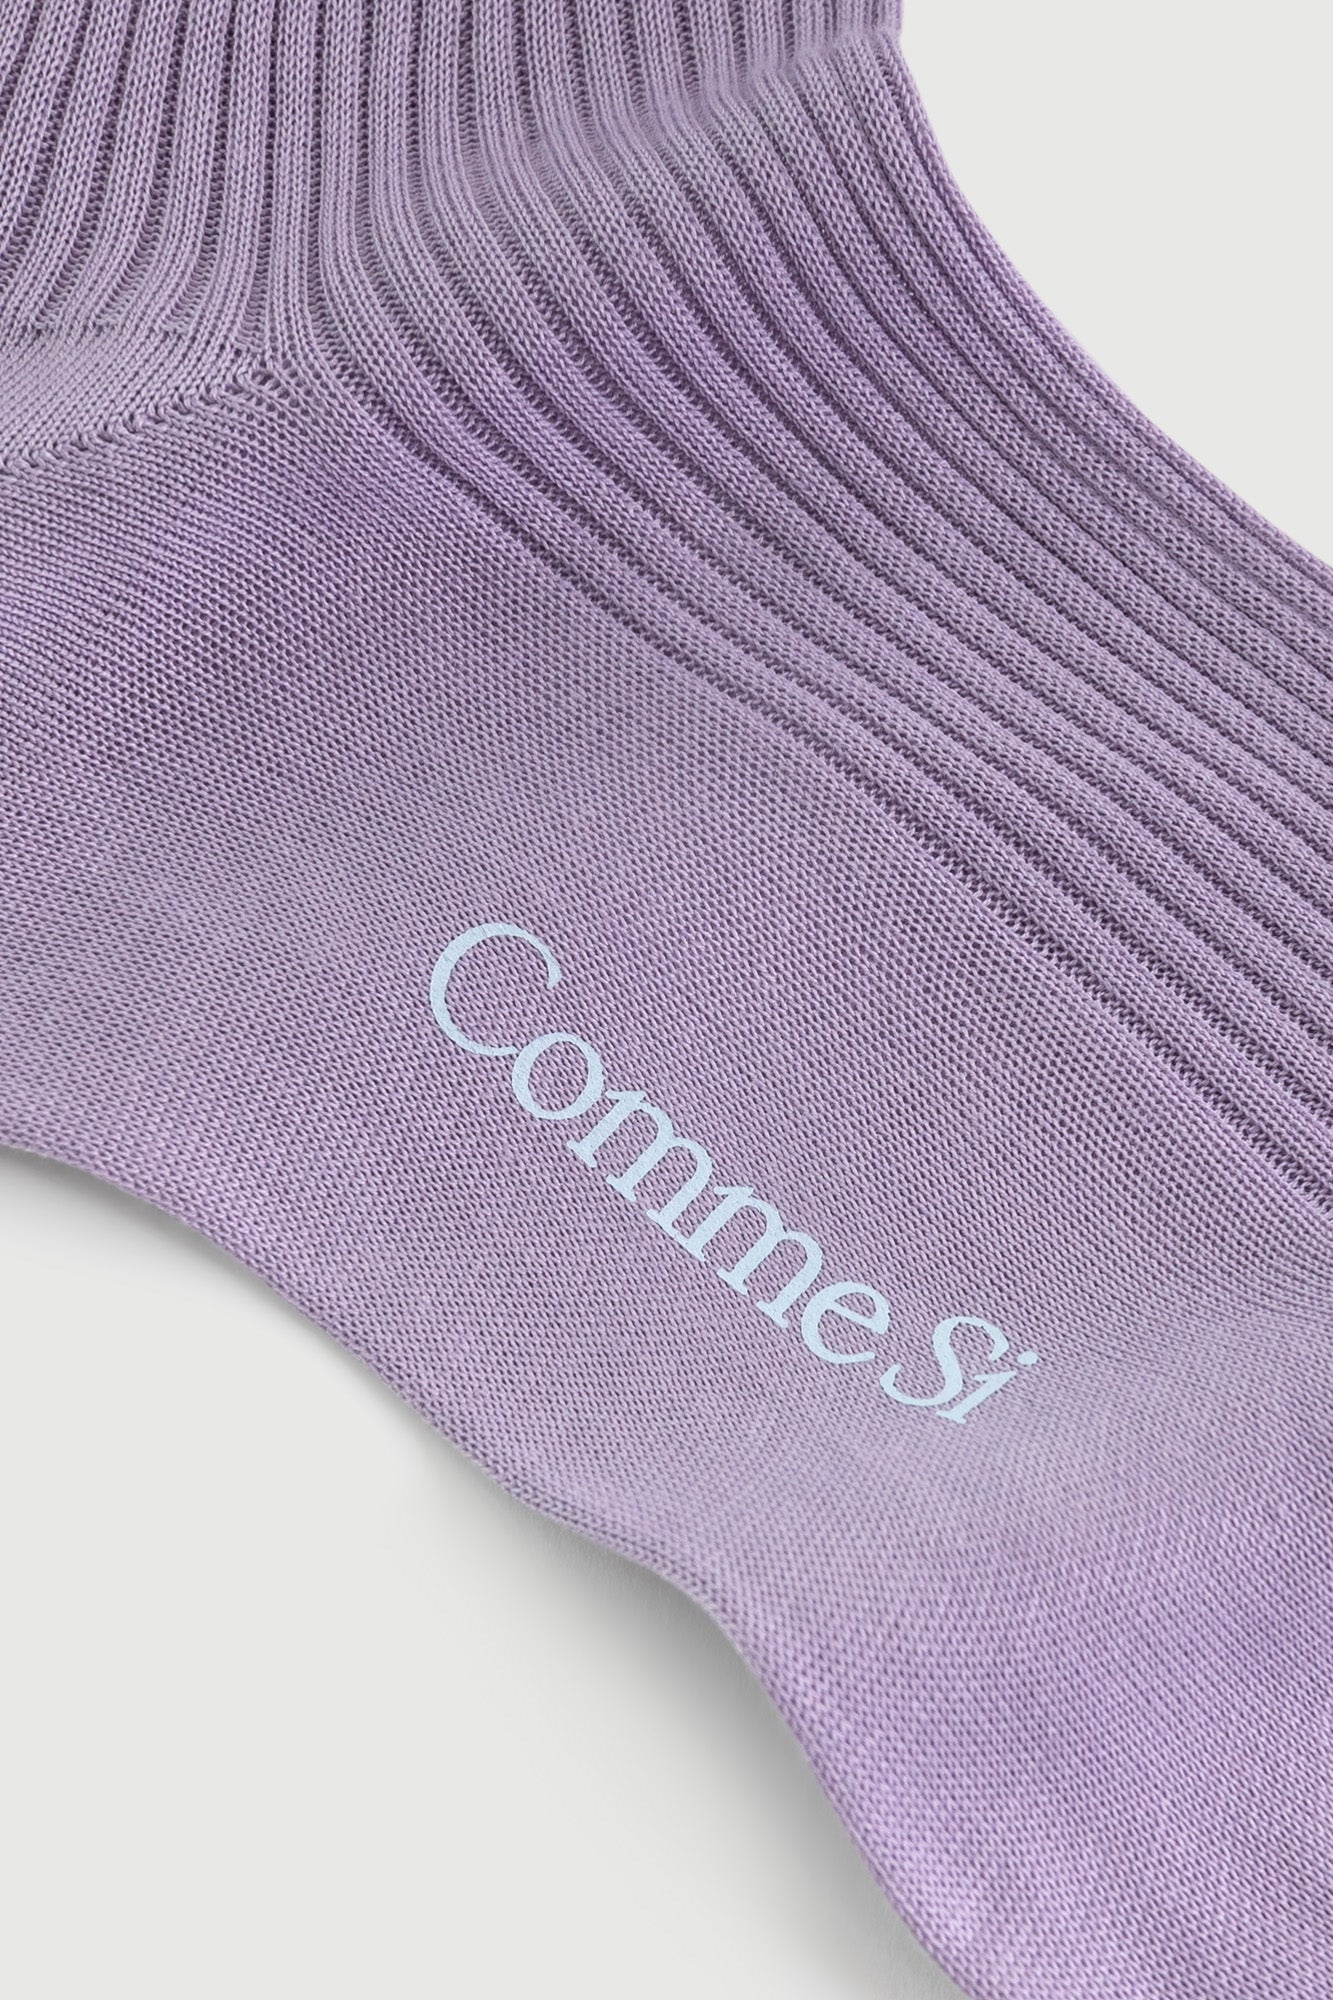 Footbed detail, The Agnelli Sock in Lilac